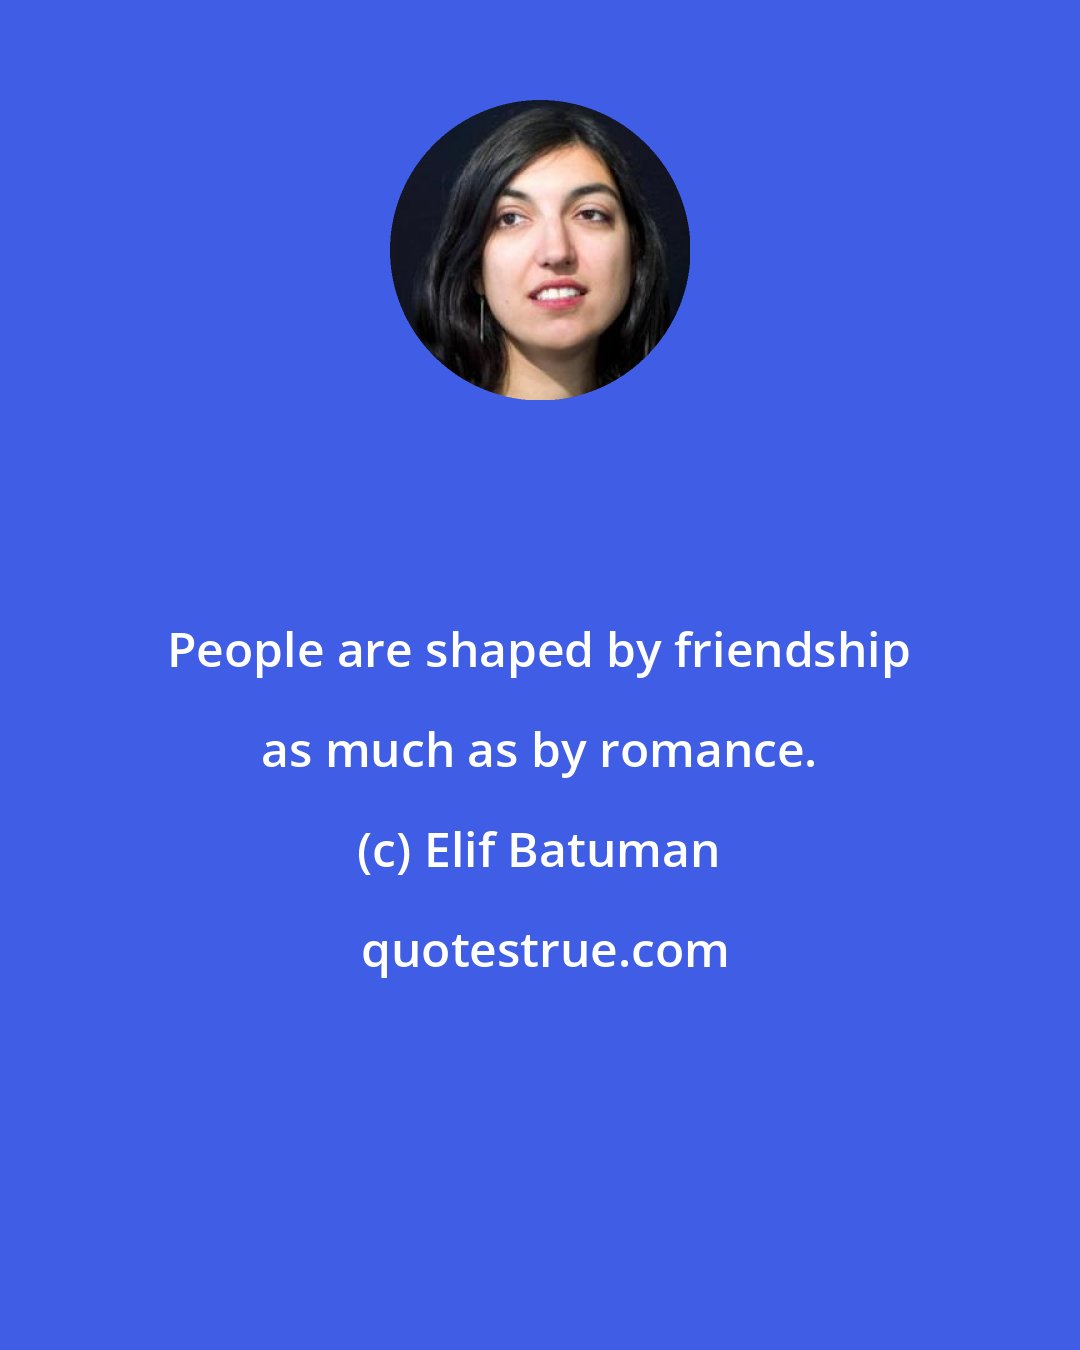 Elif Batuman: People are shaped by friendship as much as by romance.